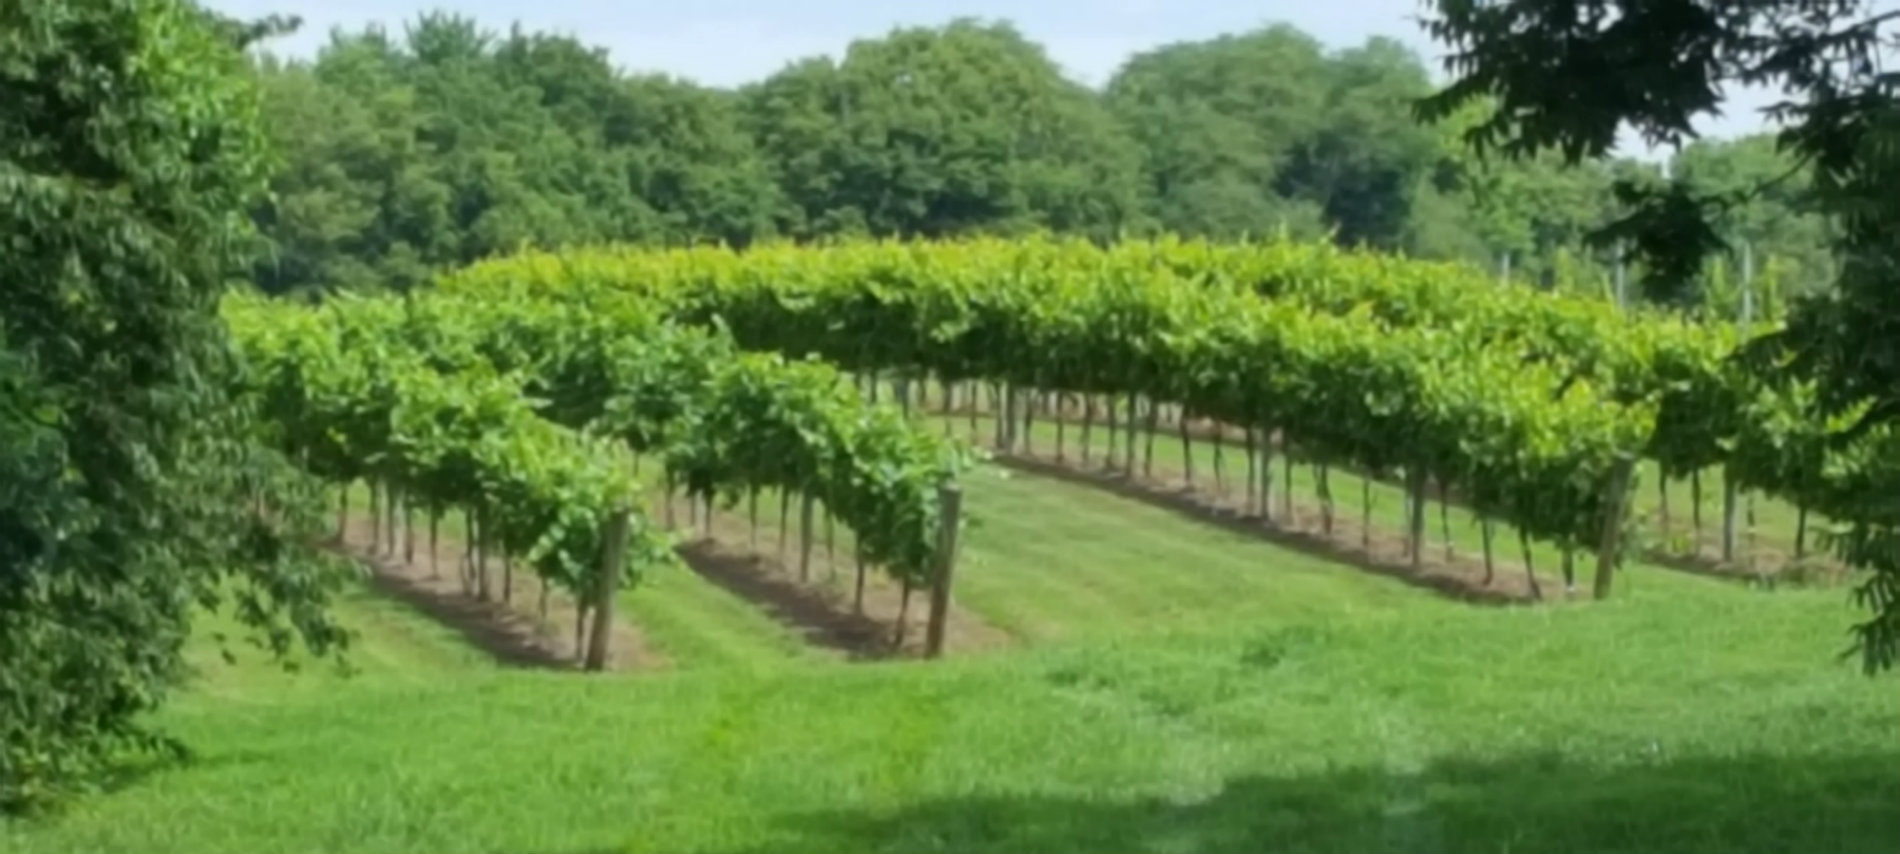 Plush green vineyard plants at Twelve Oaks Vineyard surrounded by trees on all sides.